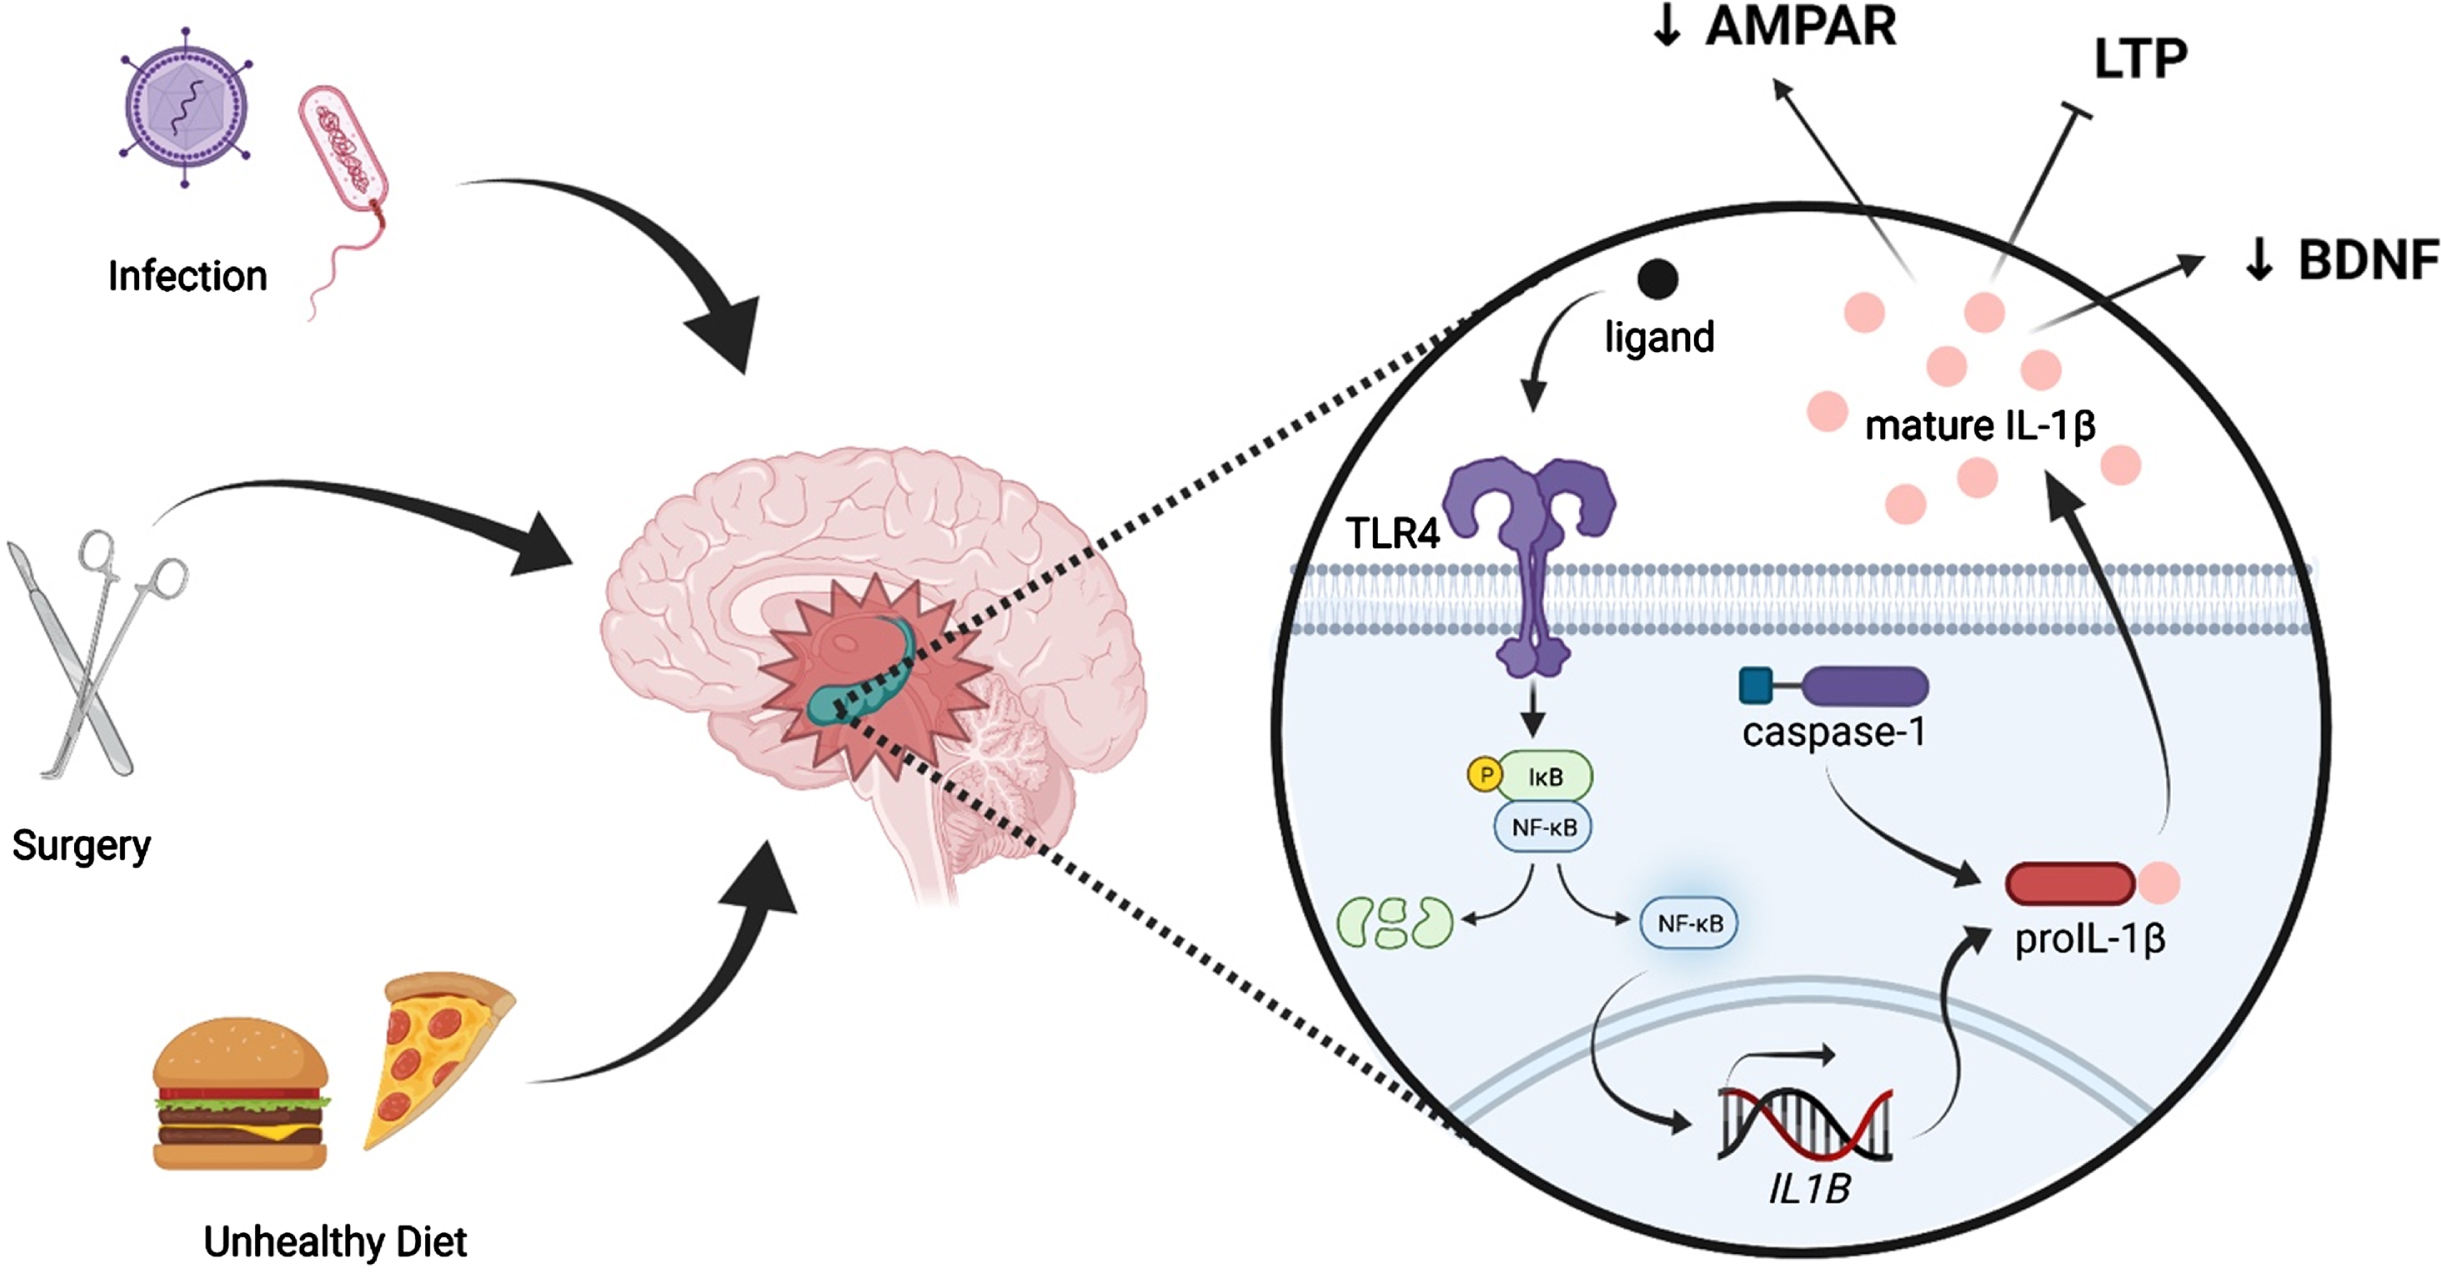 Peripheral immune challenges such as infection, surgery, and consumption of an unhealthy diet can evoke neuroinflammation, especially in the hippocampus. Such insults are known to activate the pattern recognition receptor TLR4, leading to activation of NF-κB and, ultimately, production of immature IL-1β (pro-IL-1β). Pro-IL-1β is cleaved by caspase-1, an inflammasome component, into mature IL-1β, which is released into the extracellular fluid. IL-1β elicits multiple effects on synaptic plasticity-related processes, including suppression of BDNF production, reduction of AMPAR membrane expression, and inhibition of LTP.